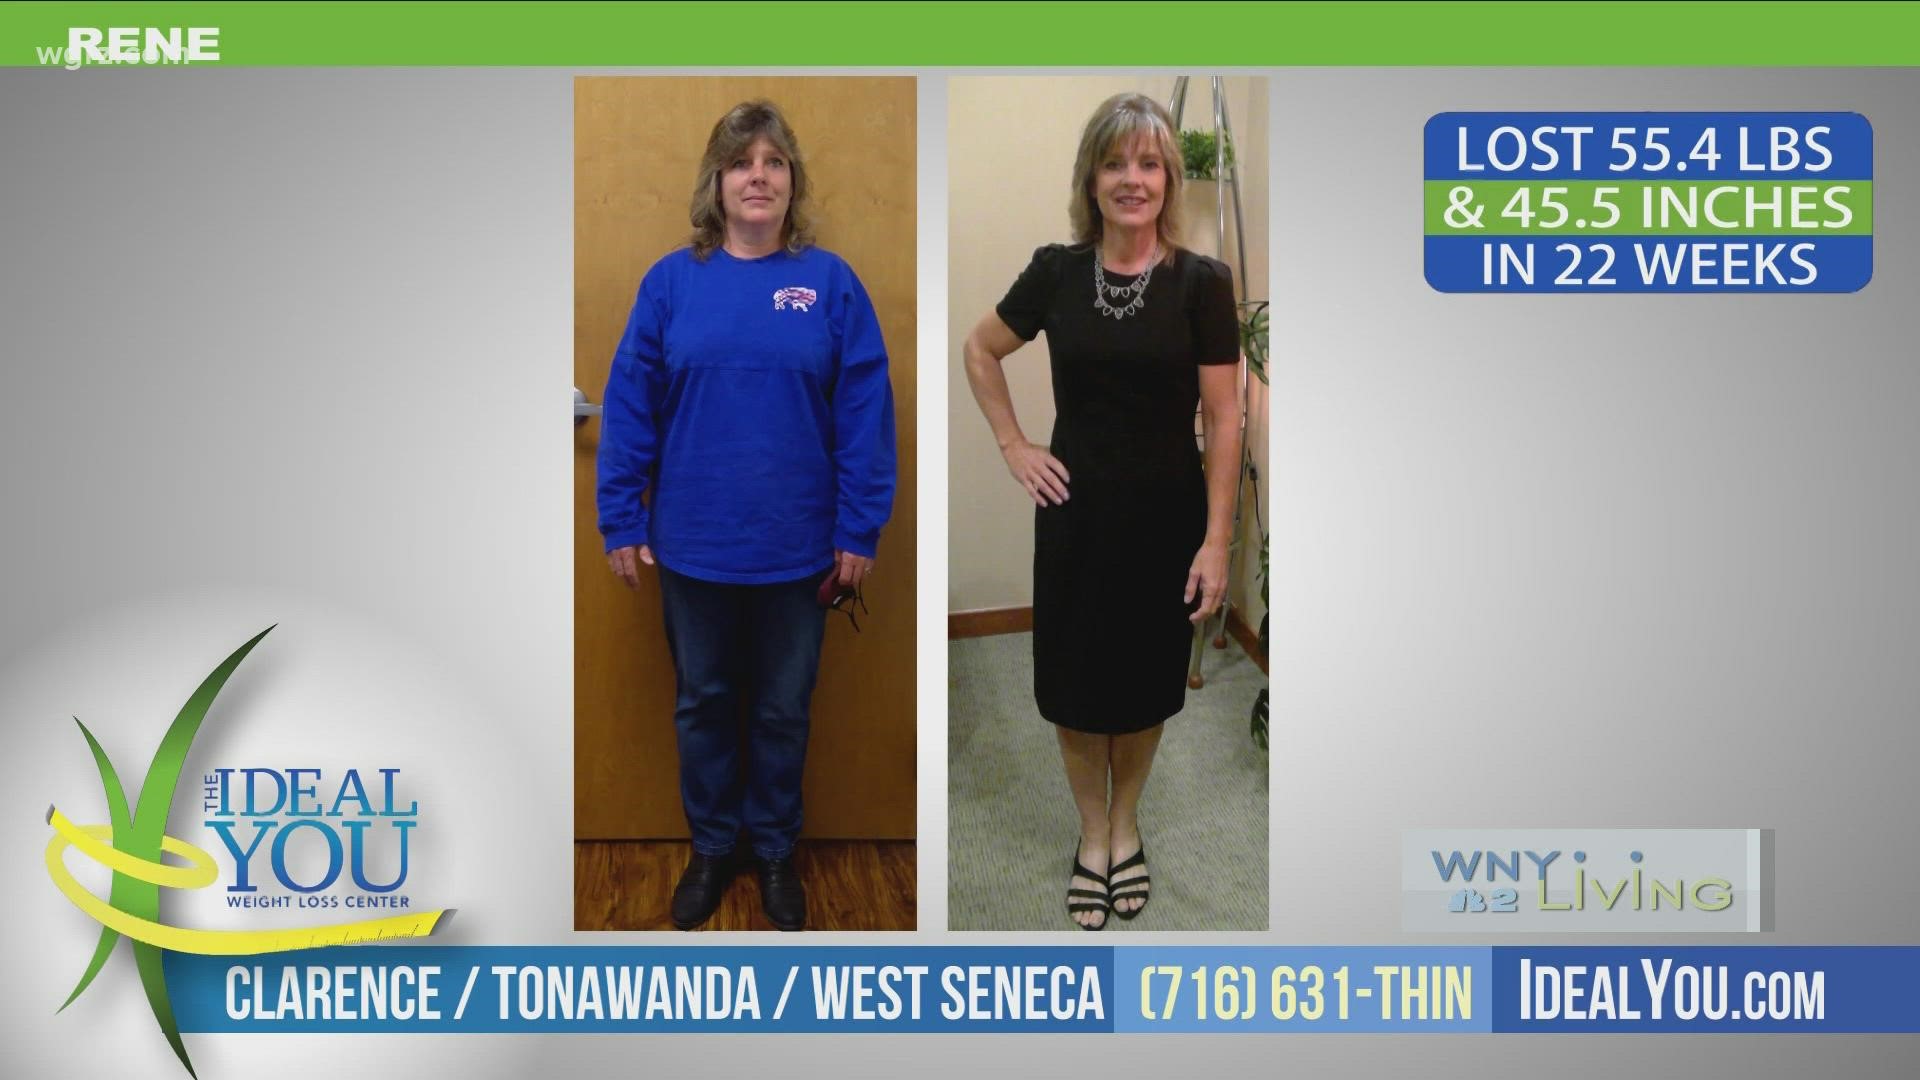 WNY Living - January 1 - The Ideal You Weight Loss Center (THIS VIDEO IS SPONSORED BY THE IDEAL YOU WEIGHT LOSS CENTER)